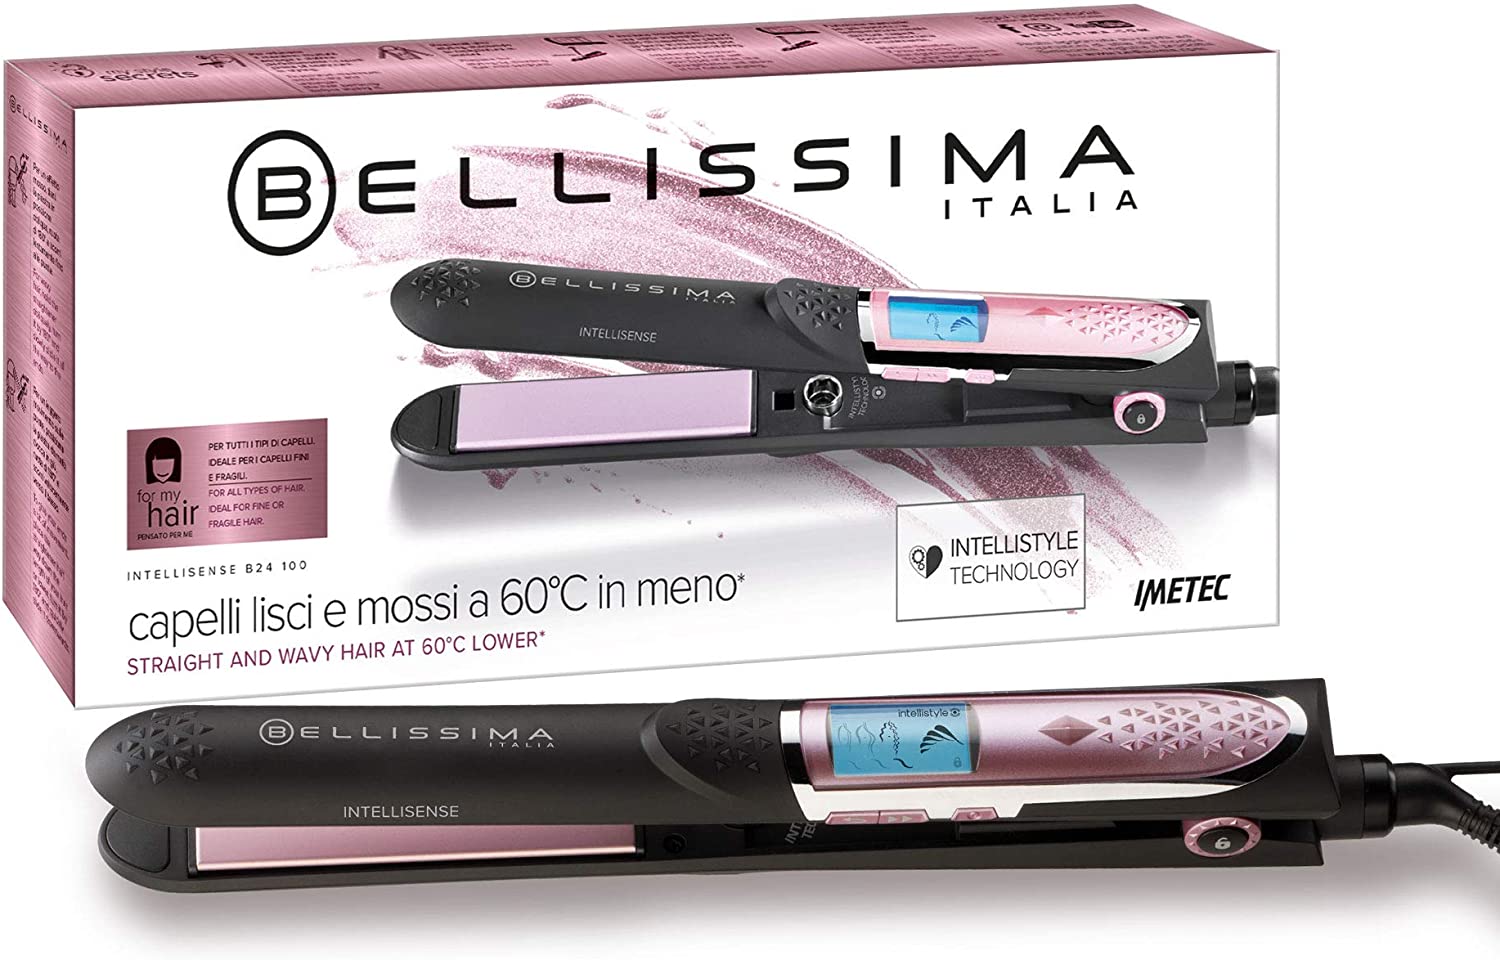 Imetec Bellissima Intellisense B24 100, straightener for straight and curly hair at 60 C less than conventional appliances, thanks to Intellistyle technology, hair straightener.